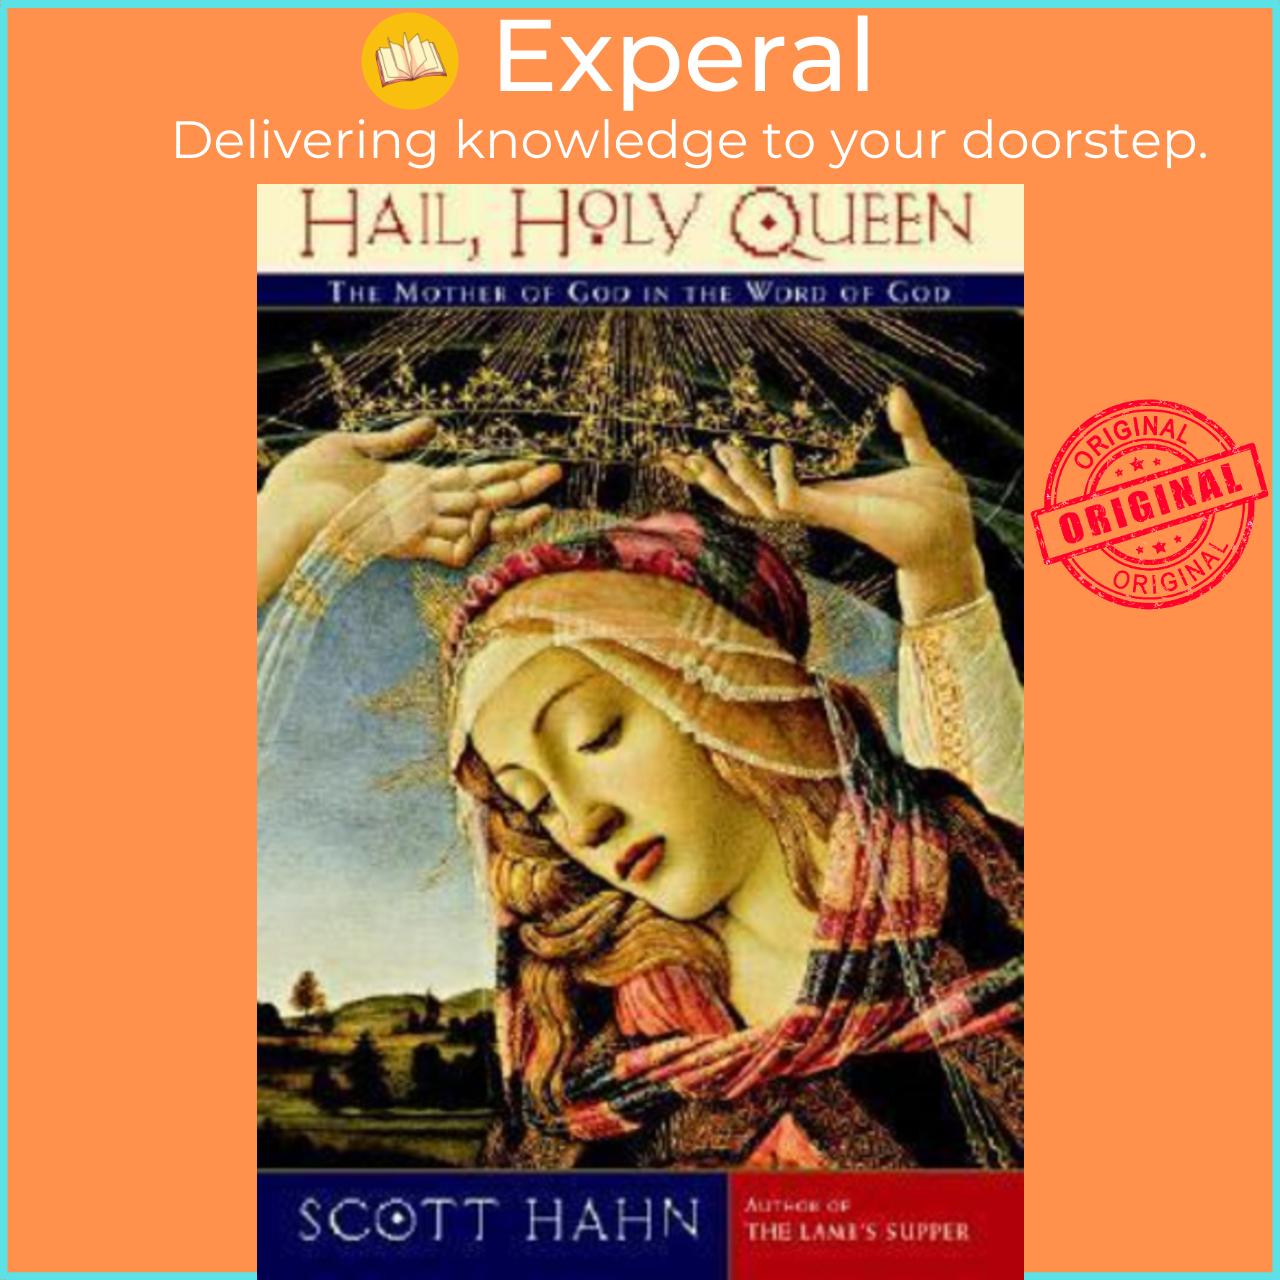 Sách - Hail, Holy Queen : The Mother of God in the Word of God by Scott Hahn (US edition, paperback)